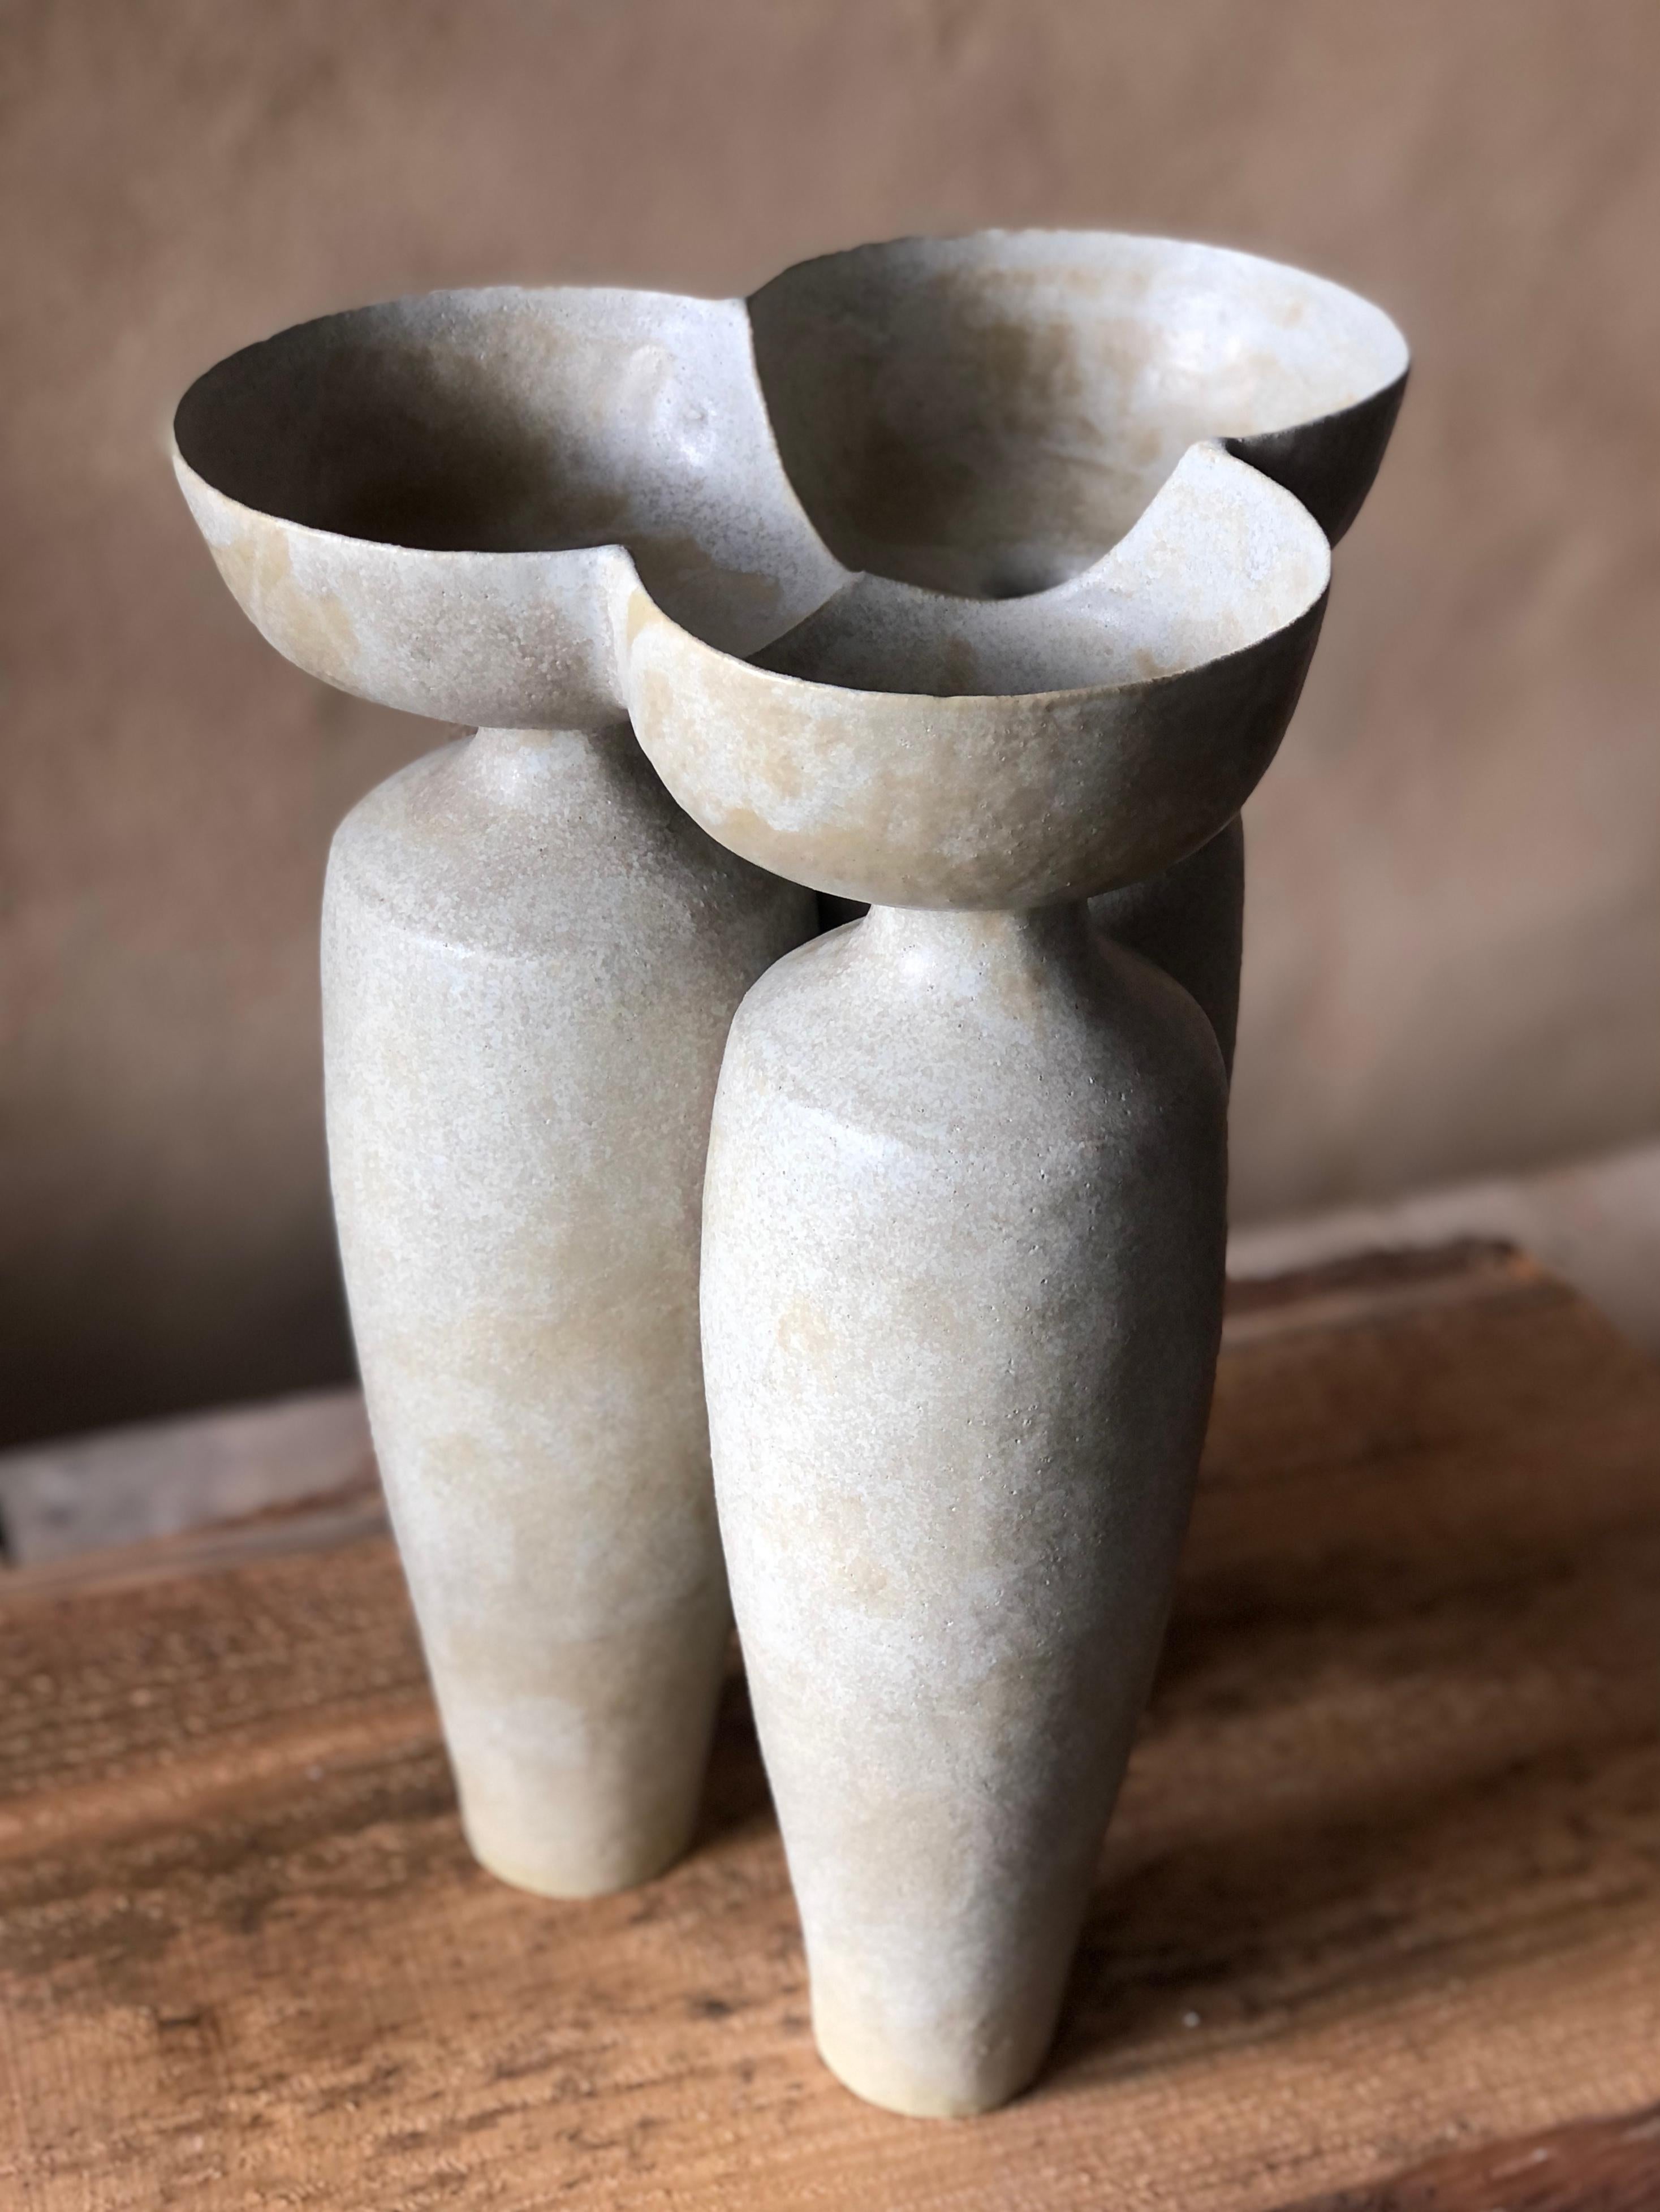 Meeting Vase by Sophie Vaidie
One Of A Kind.
Dimensions: Ø 25 x H 39 cm. 
Materials: Beige stoneware with beige glaze.

In the beginning, there was a need to make, with the hands, the touch, the senses. Then came the desire to create and imagine